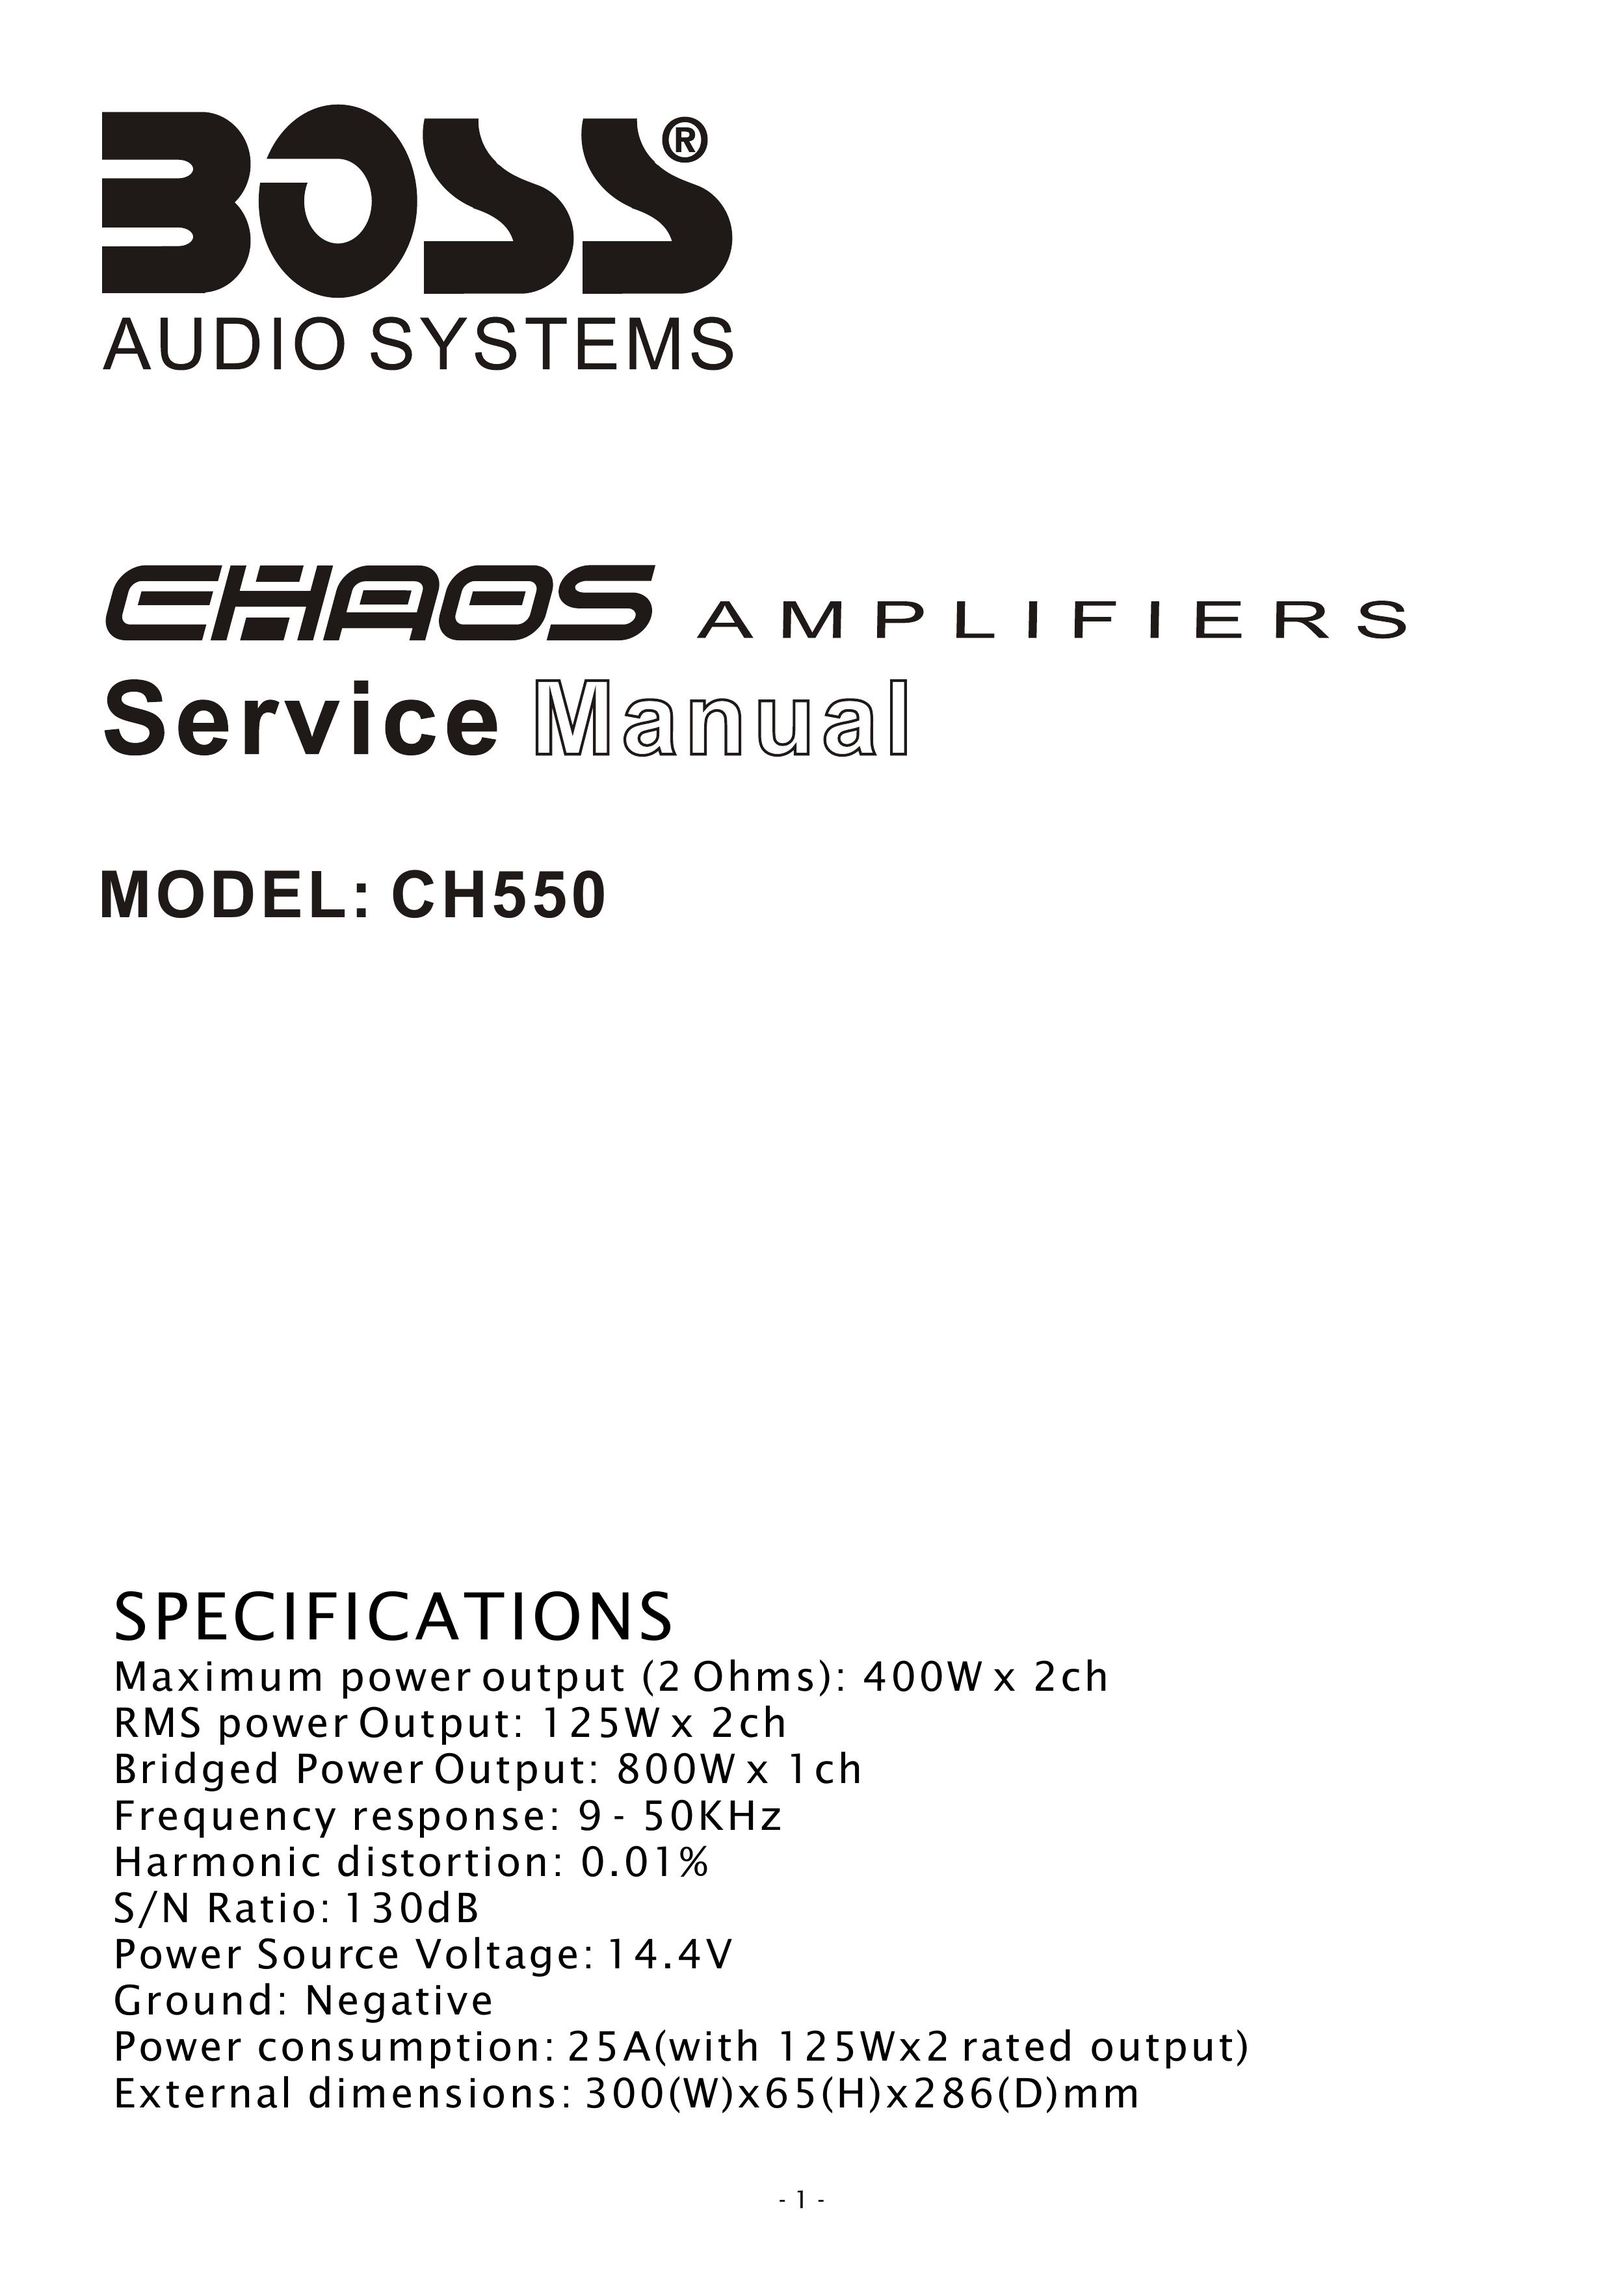 Boss Audio Systems CH550 Stereo Amplifier User Manual